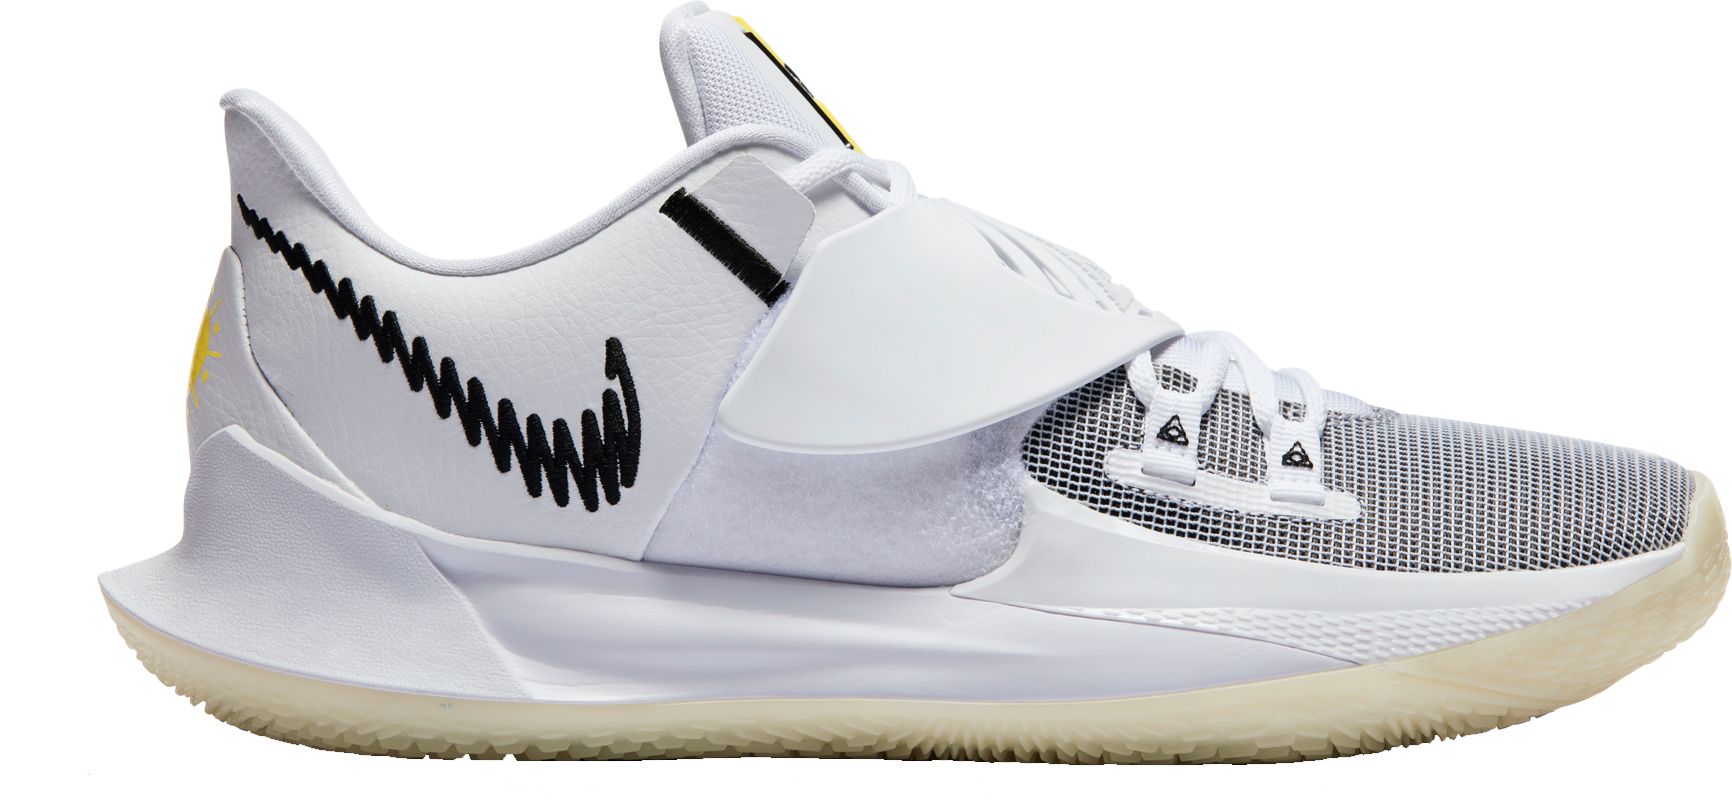 kyrie 3 low white